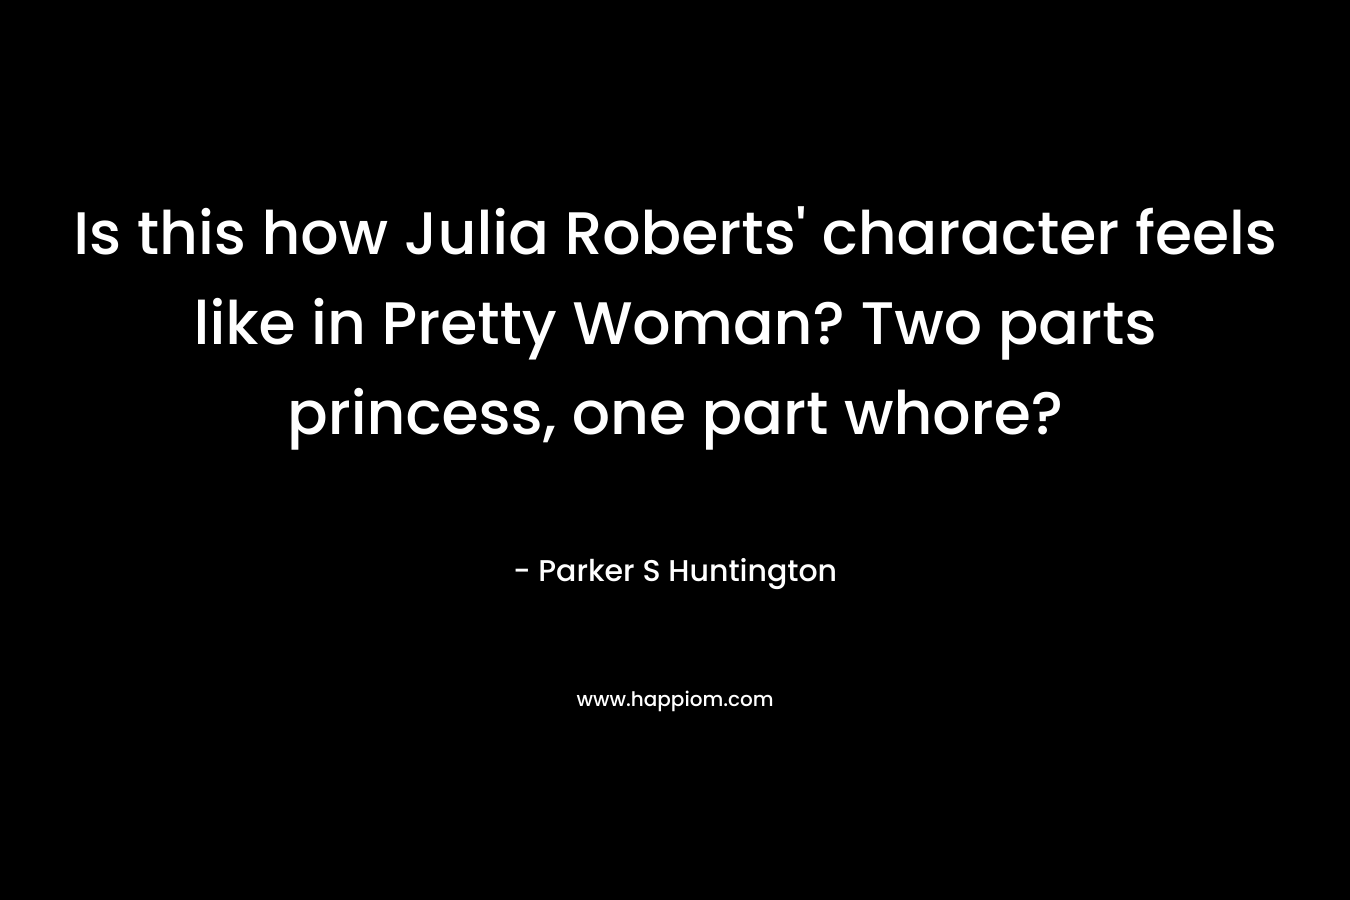 Is this how Julia Roberts’ character feels like in Pretty Woman? Two parts princess, one part whore? – Parker S Huntington